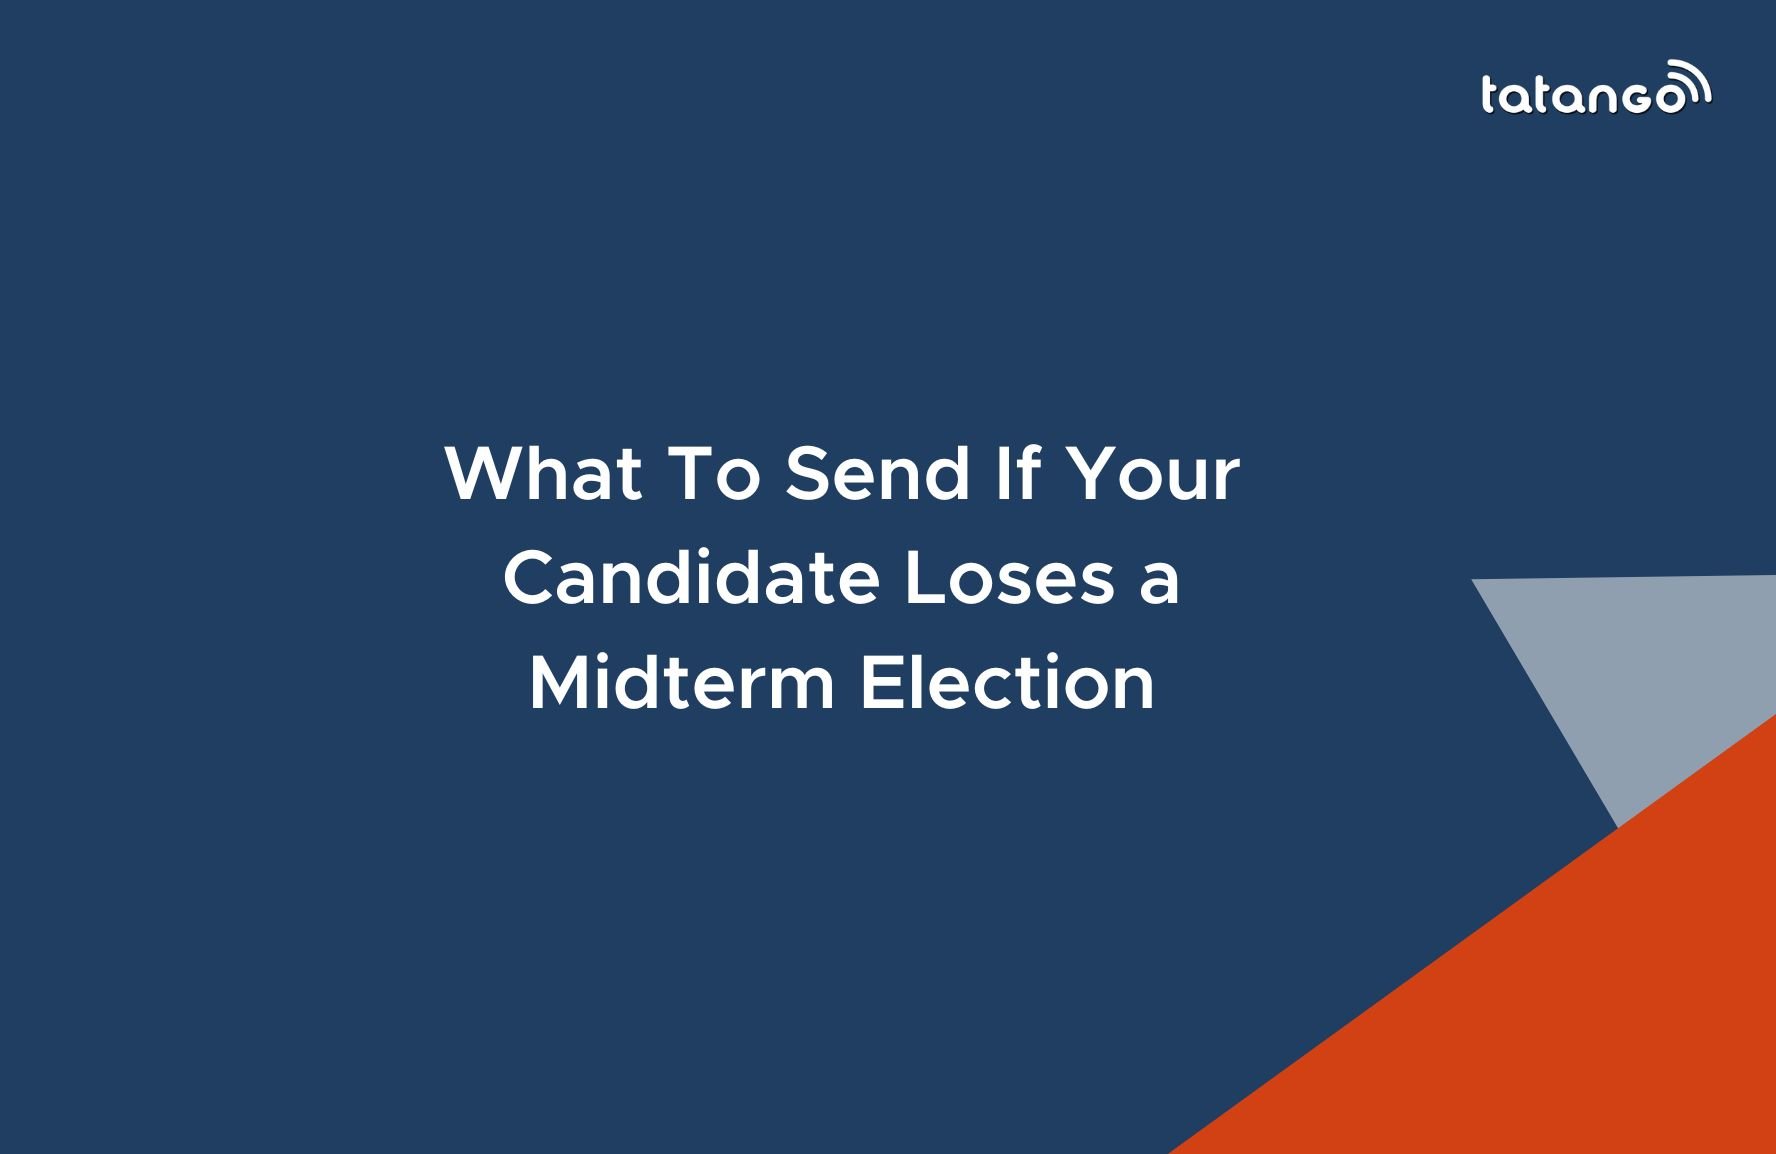 What To Send If Your Candidate Loses a Midterm Election